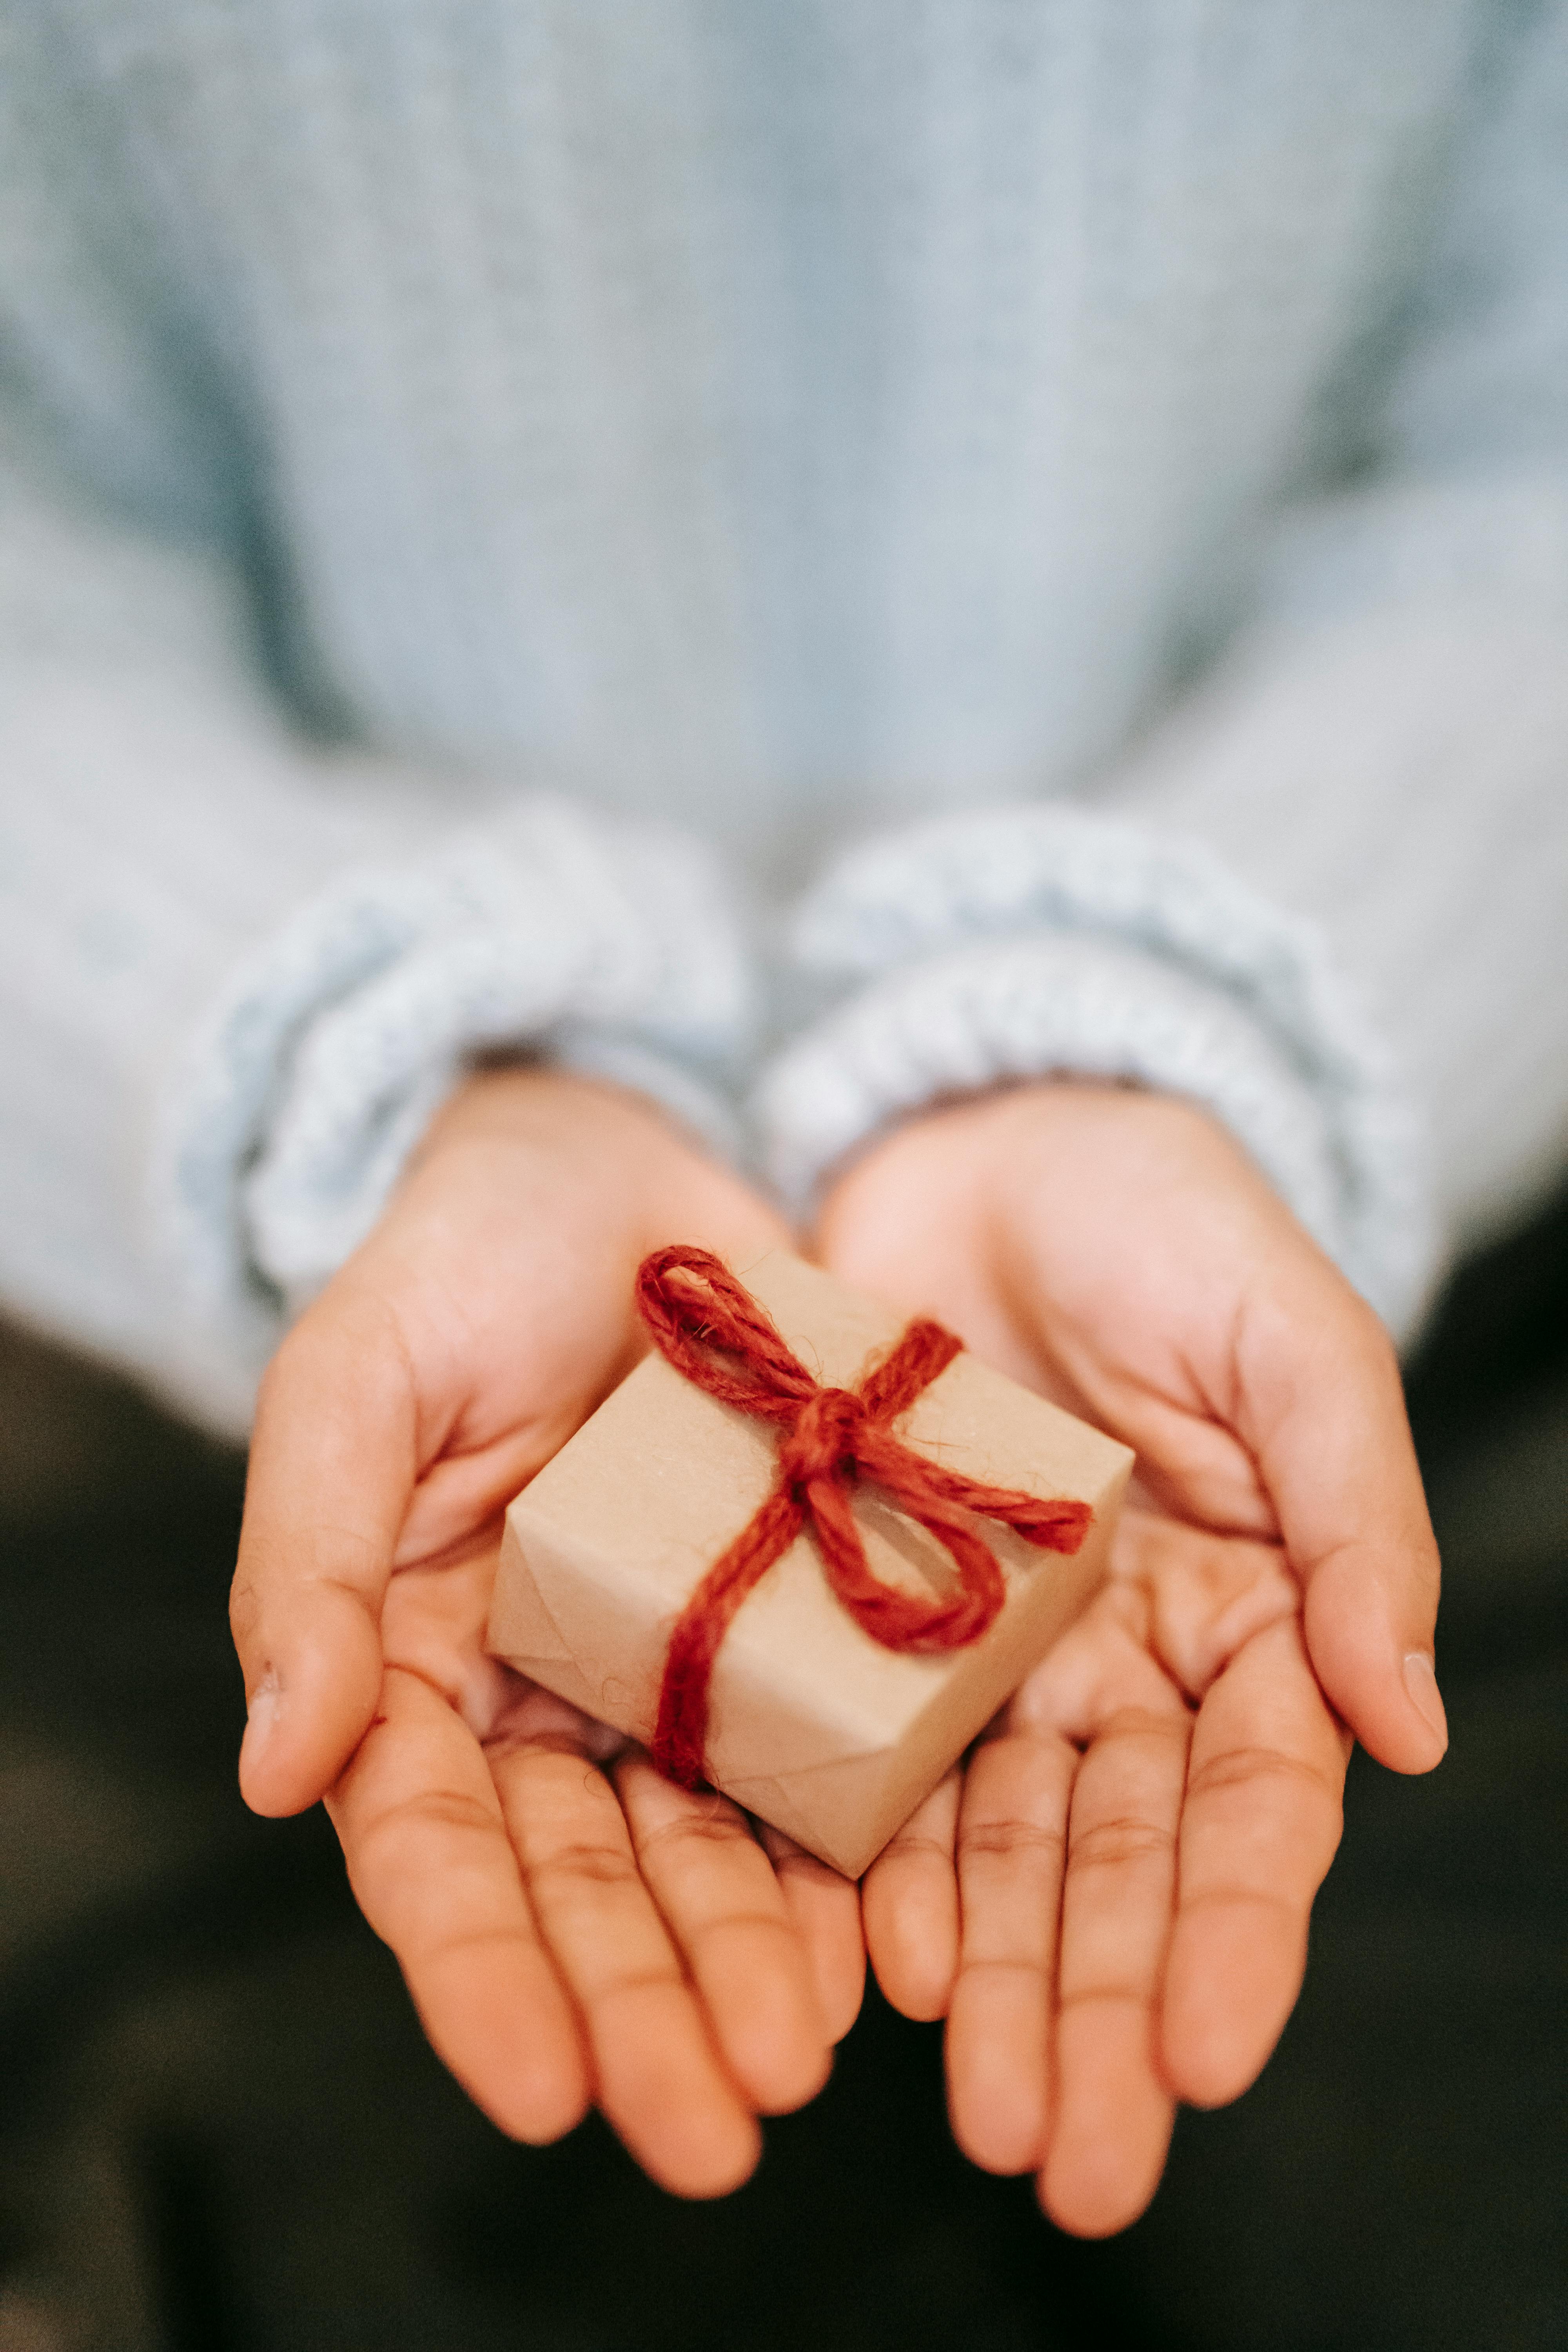 A person holding a small gift box | Source: Pexels